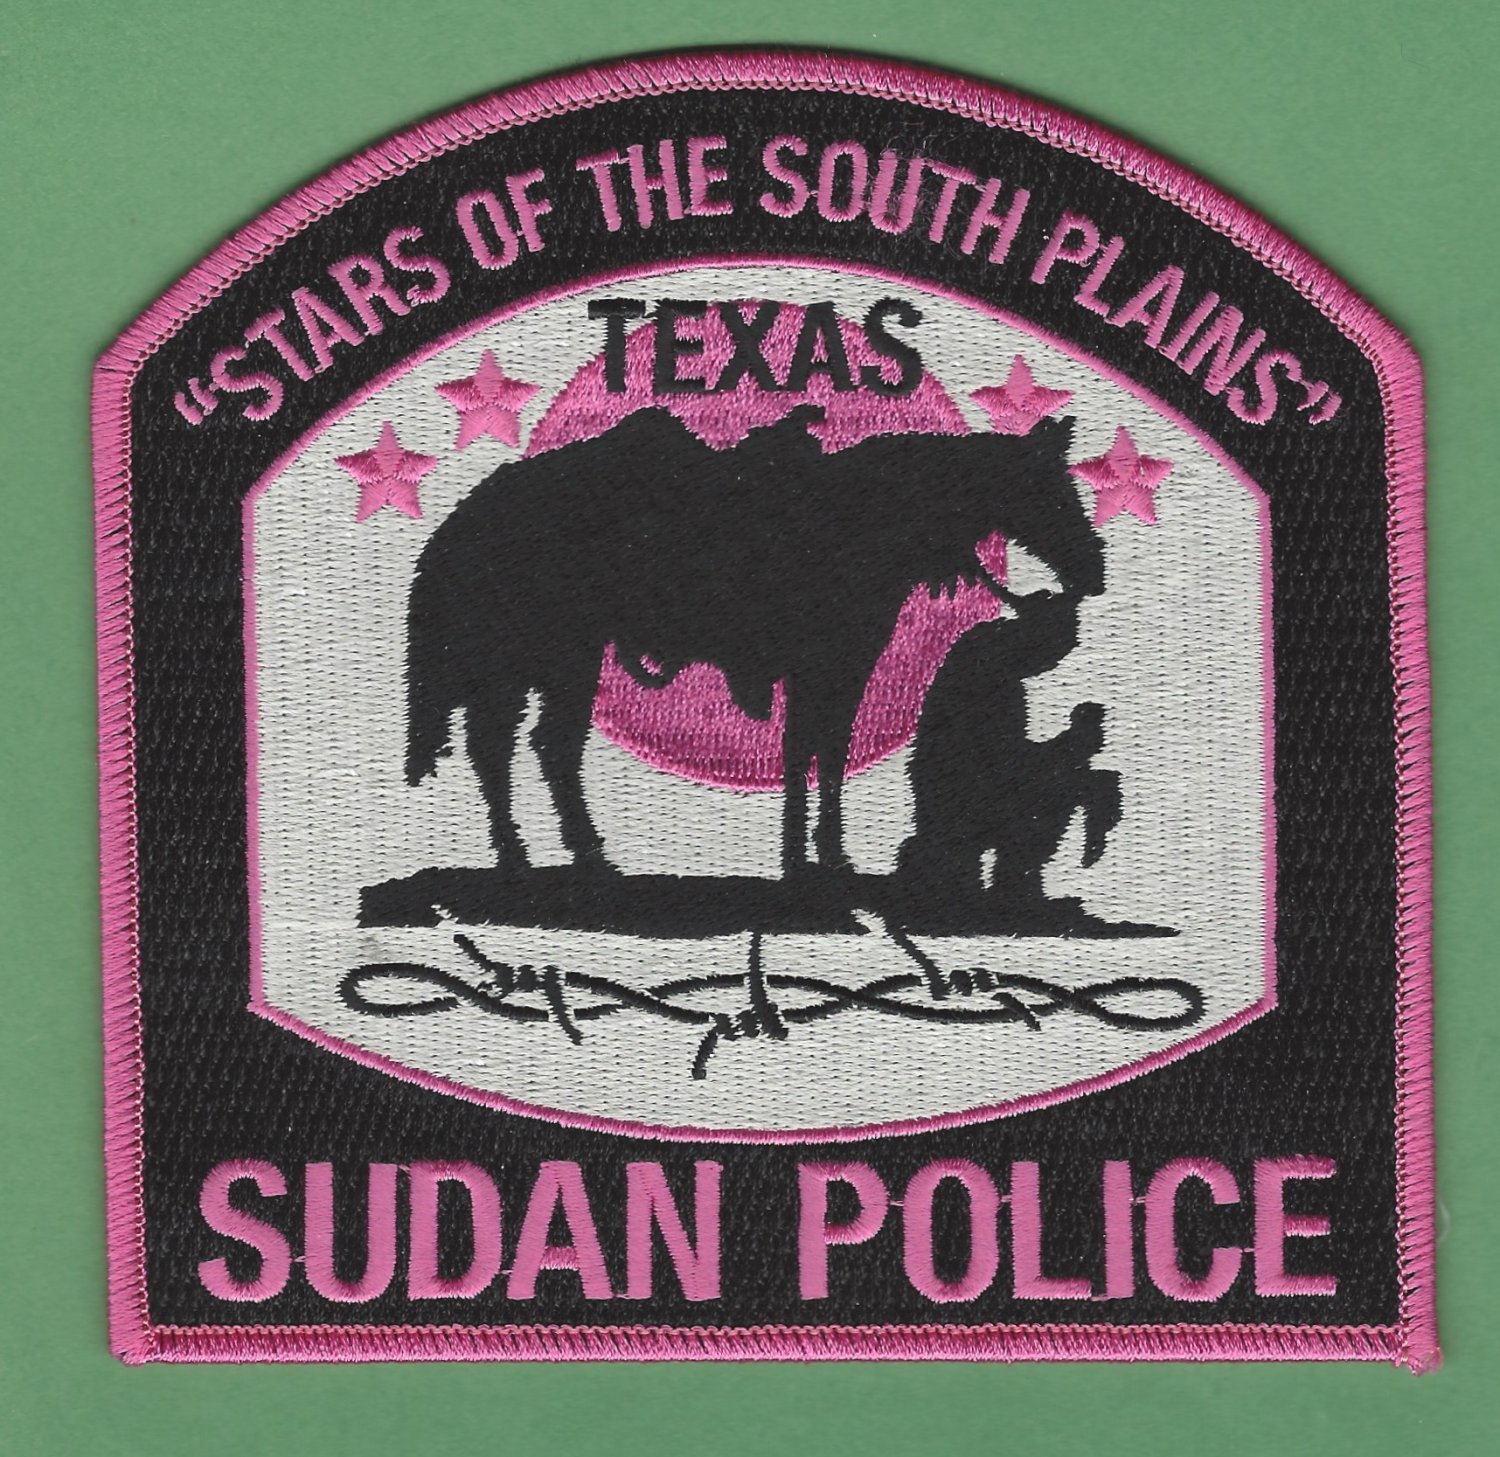 Sudan Police Patch from Texas in mint condition. 